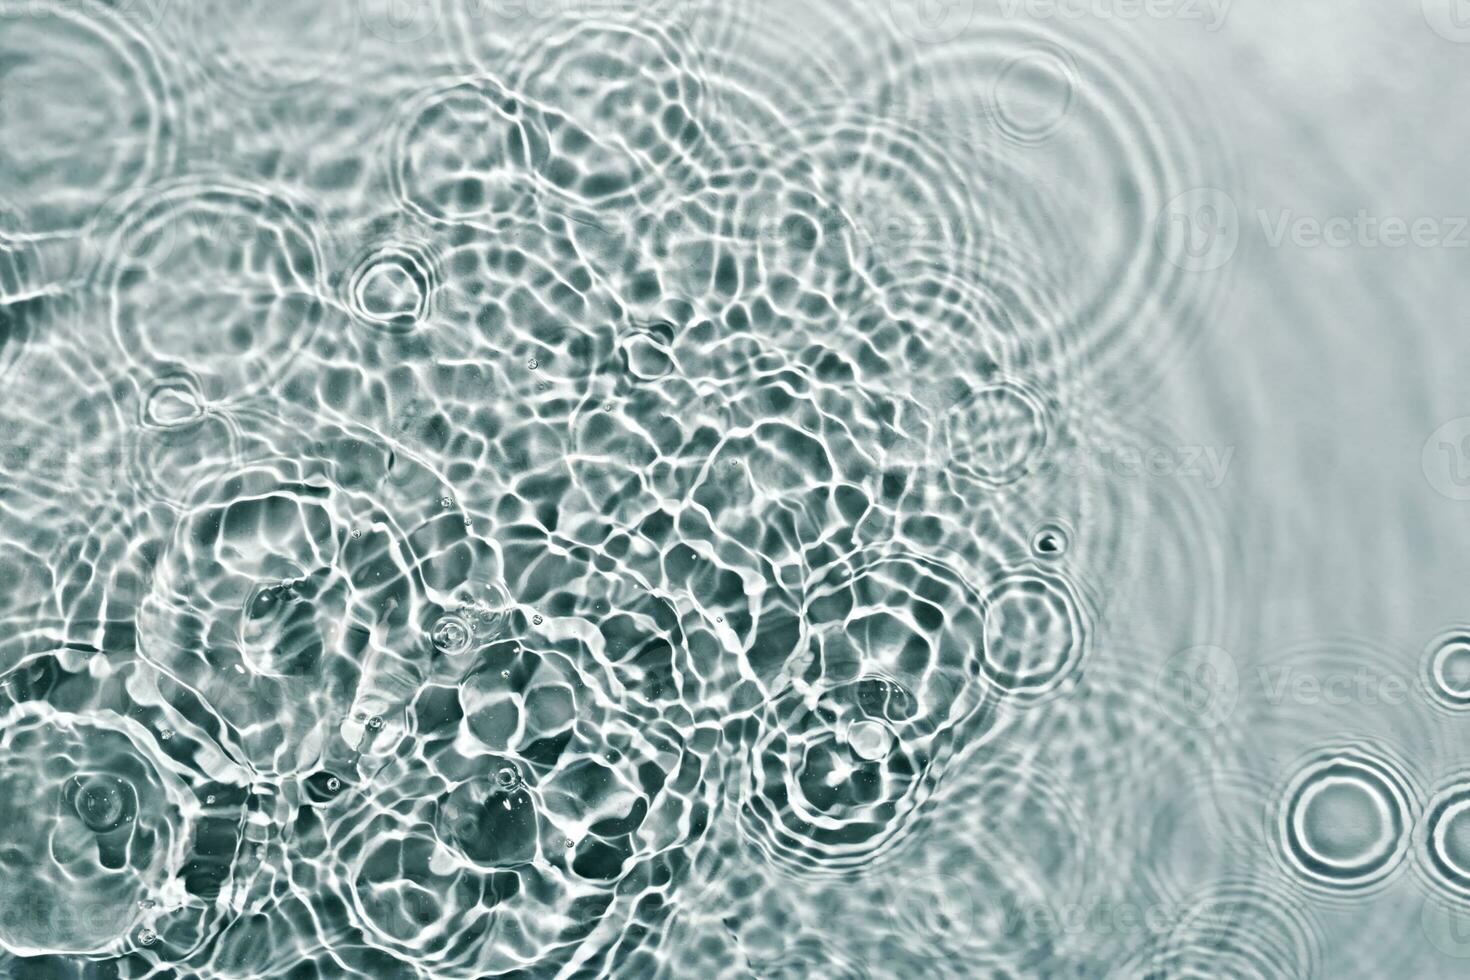 Cosmetic moisturizer micellar water. Abstract transparent liquid background with concentric circles. Soft focus photo